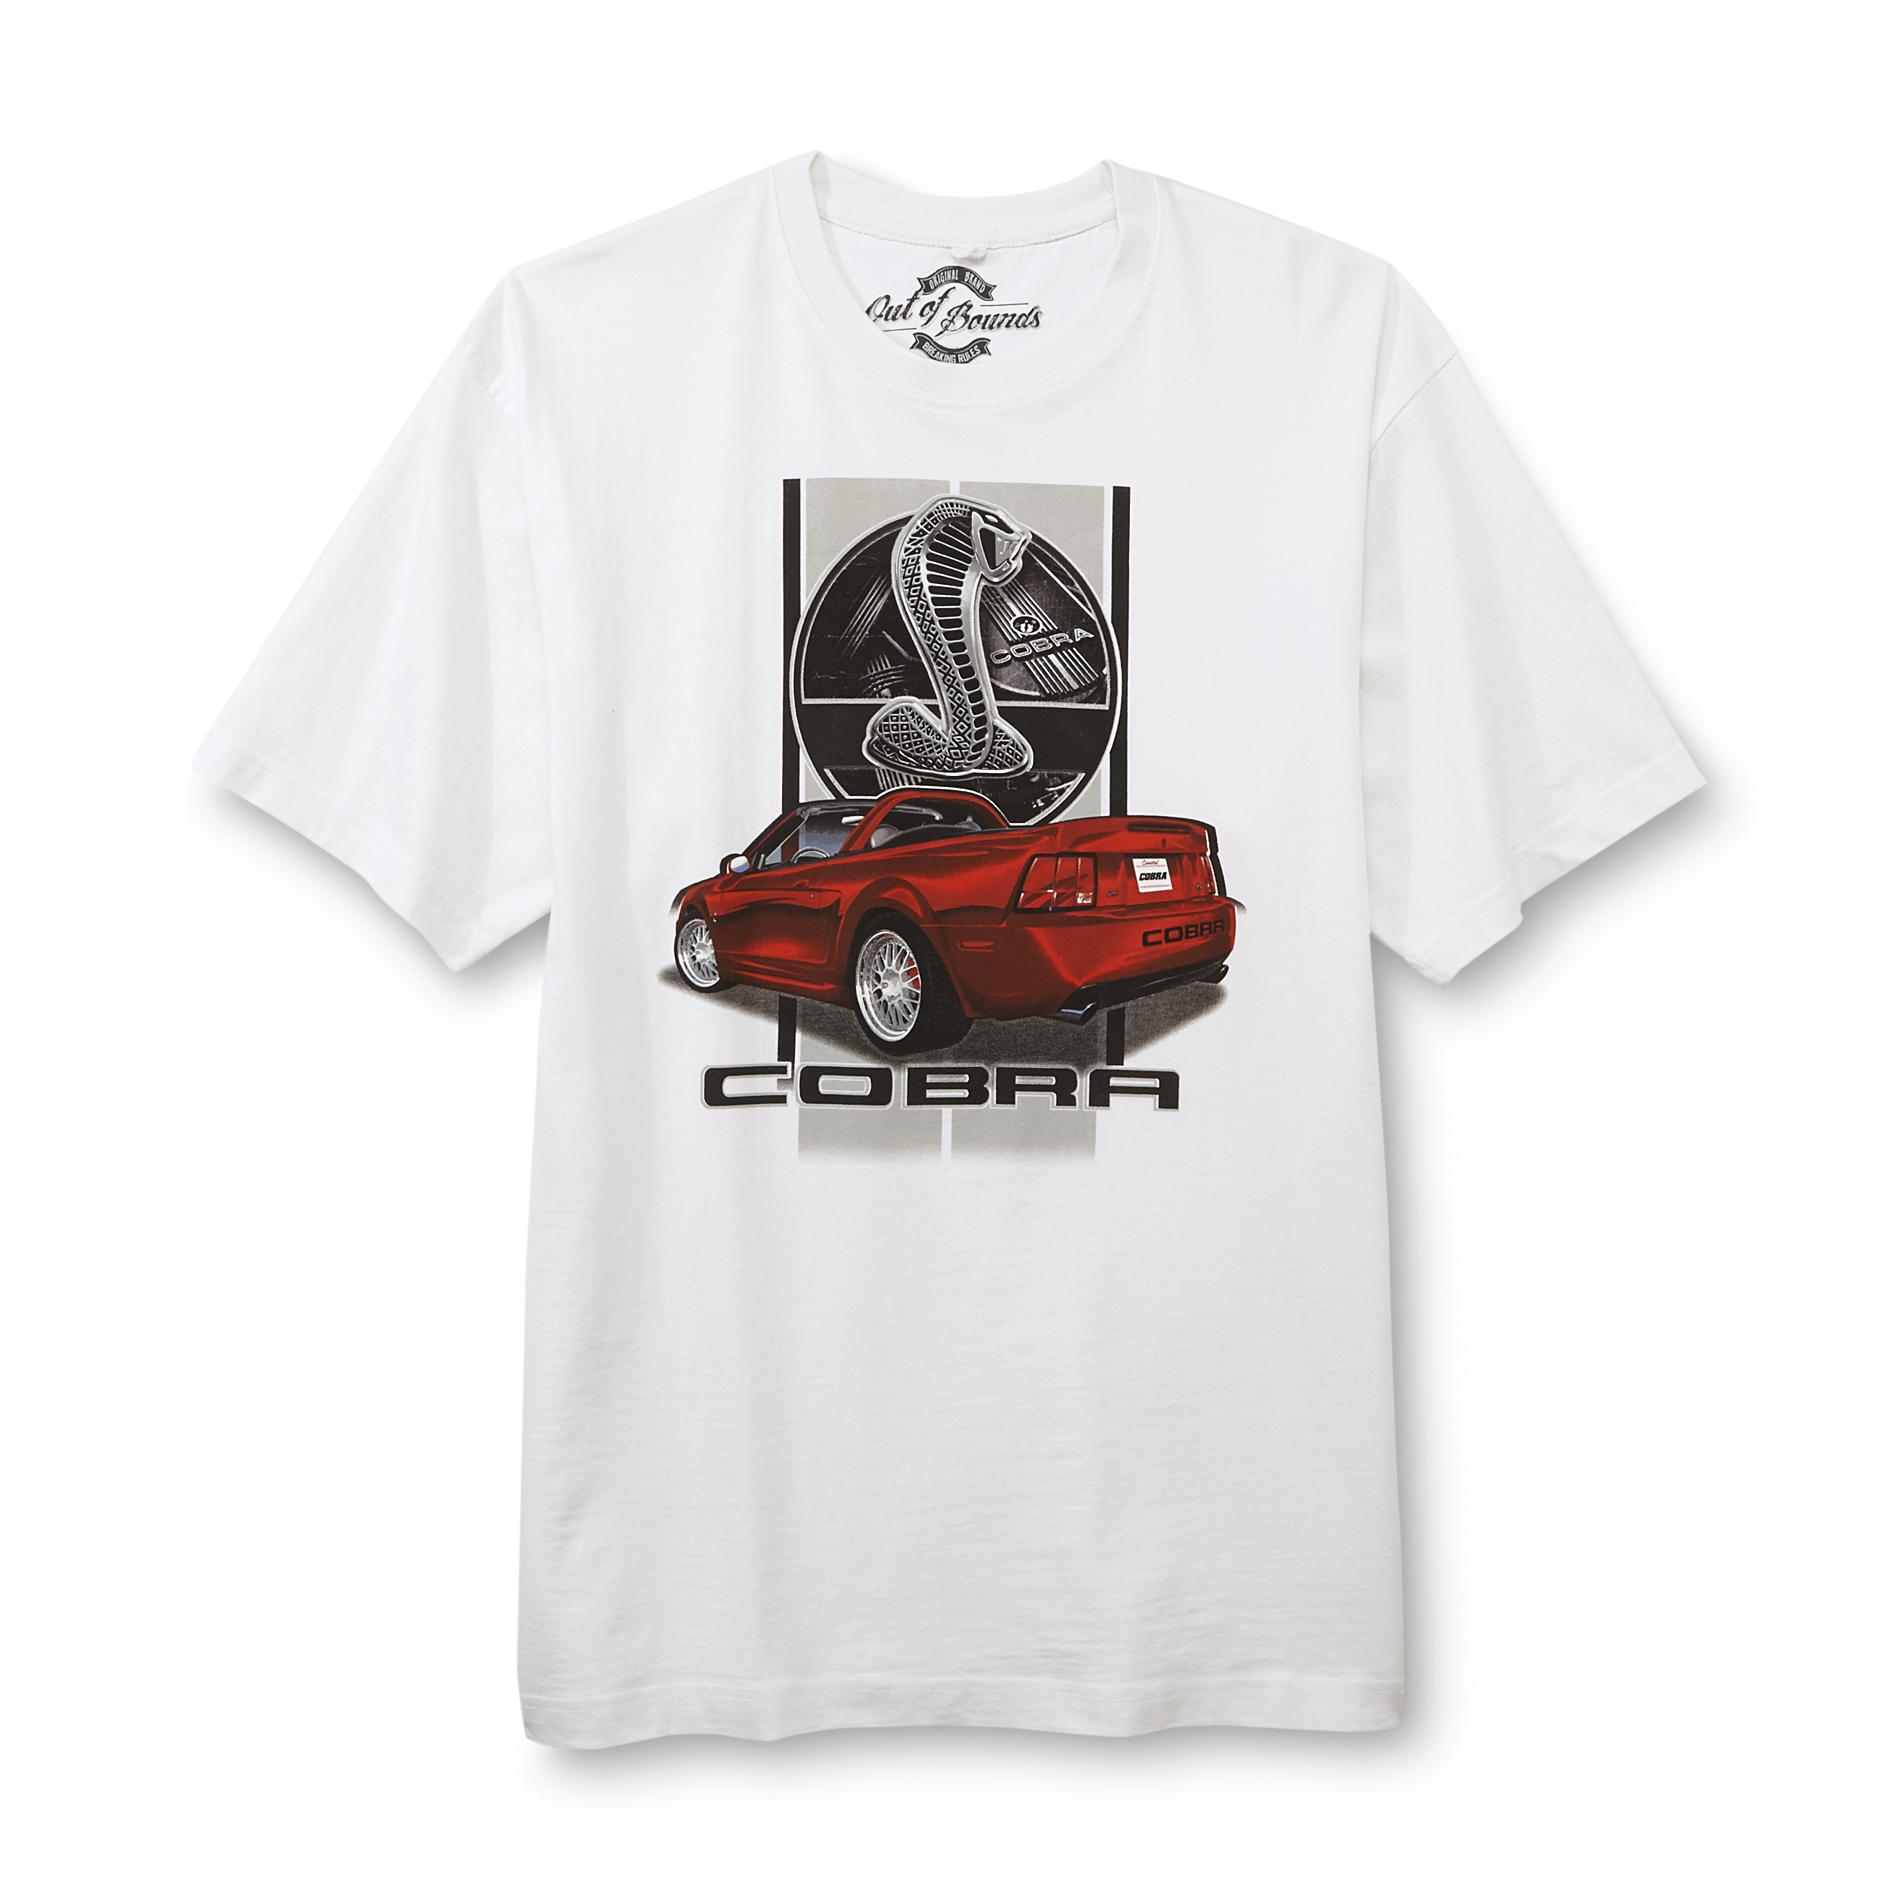 Out of Bounds Men's Graphic T-Shirt - Ford Mustang Cobra